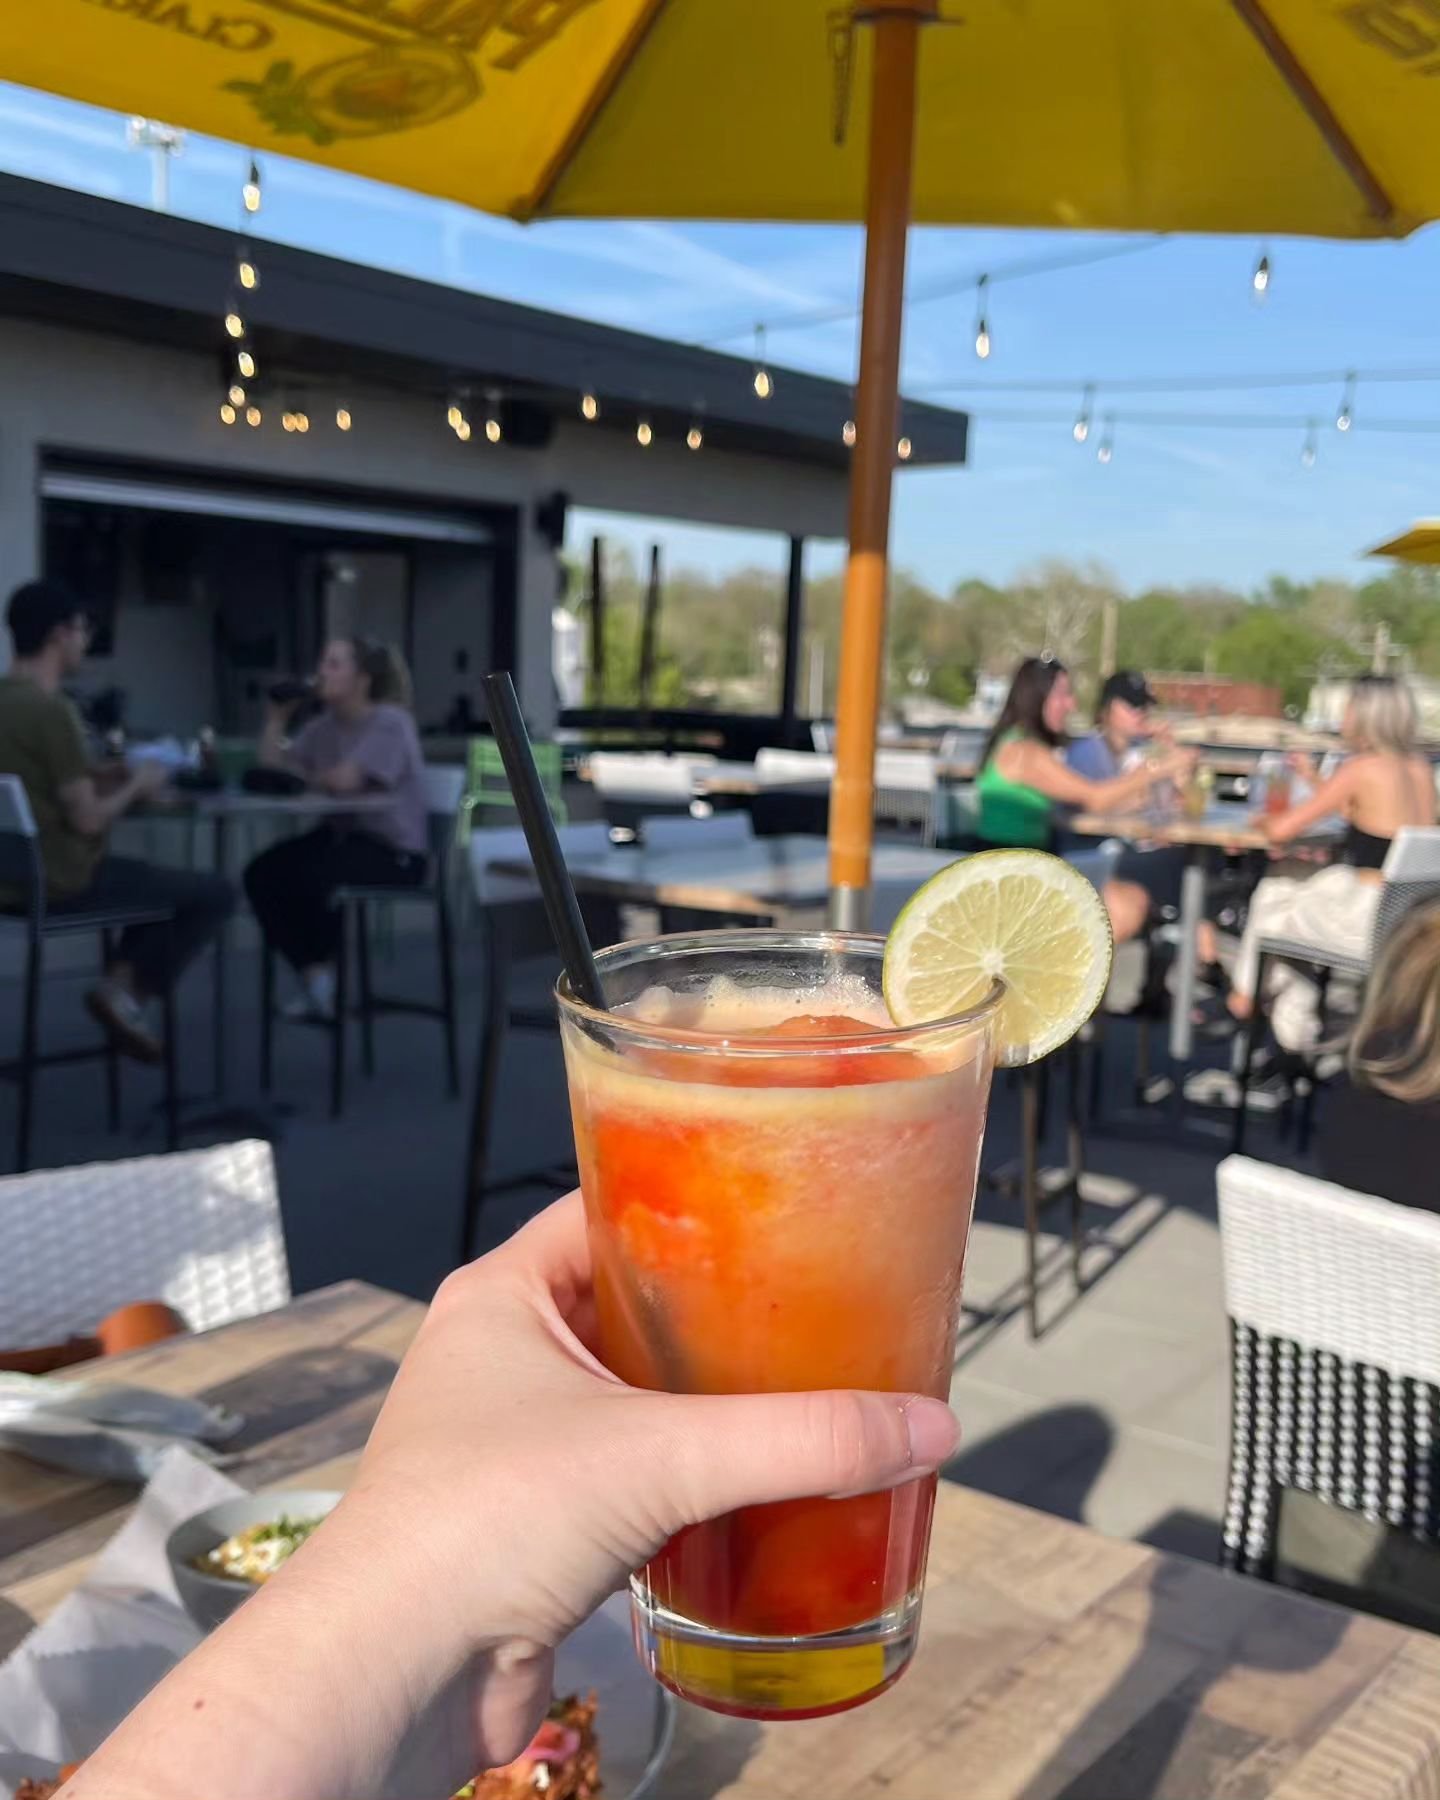 Cheers to Earth Day!&nbsp;🌍&nbsp;At Barrio KC, we're celebrating by giving our limes and avocados the spotlight they deserve. Join us for a day of eco-friendly indulgence&mdash;because every margarita counts towards a greener planet, right?&nbsp;🍹?